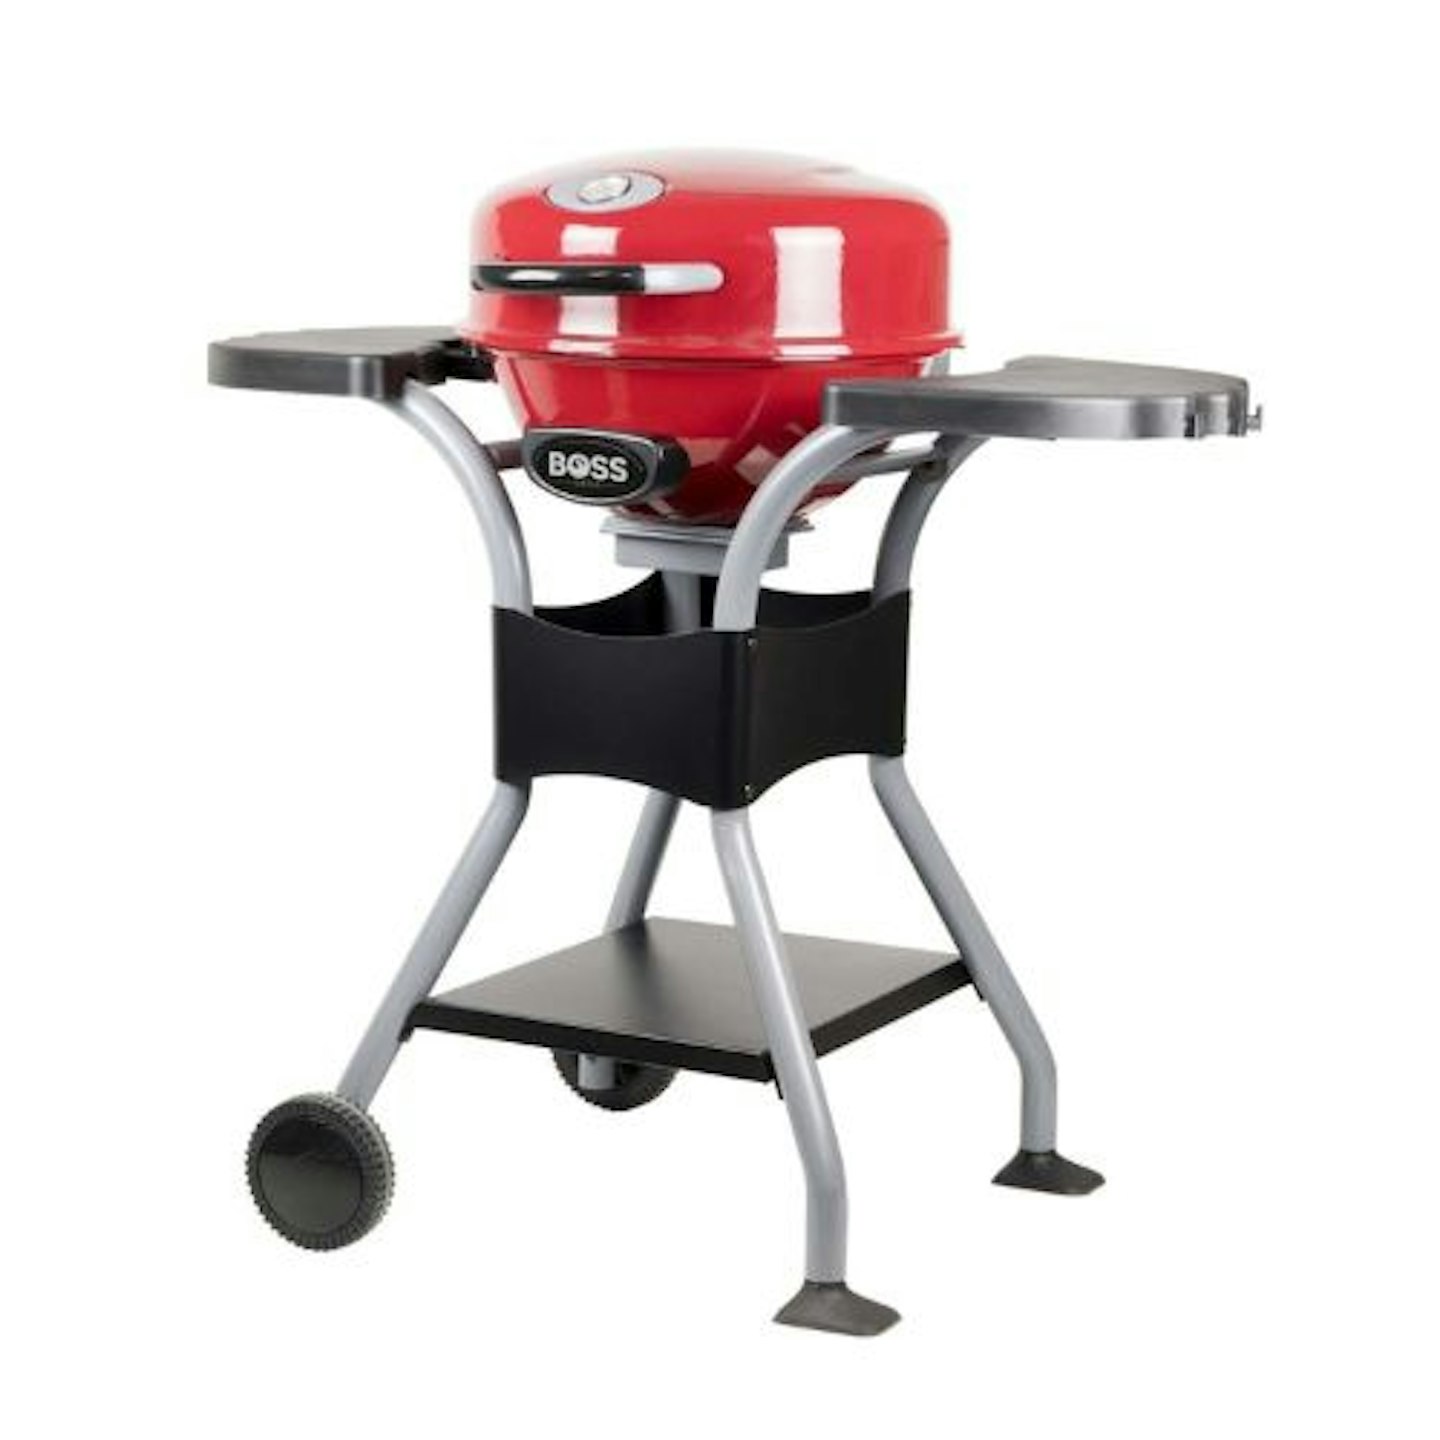 Boss Grill Compact Electric BBQ Grill with Cover